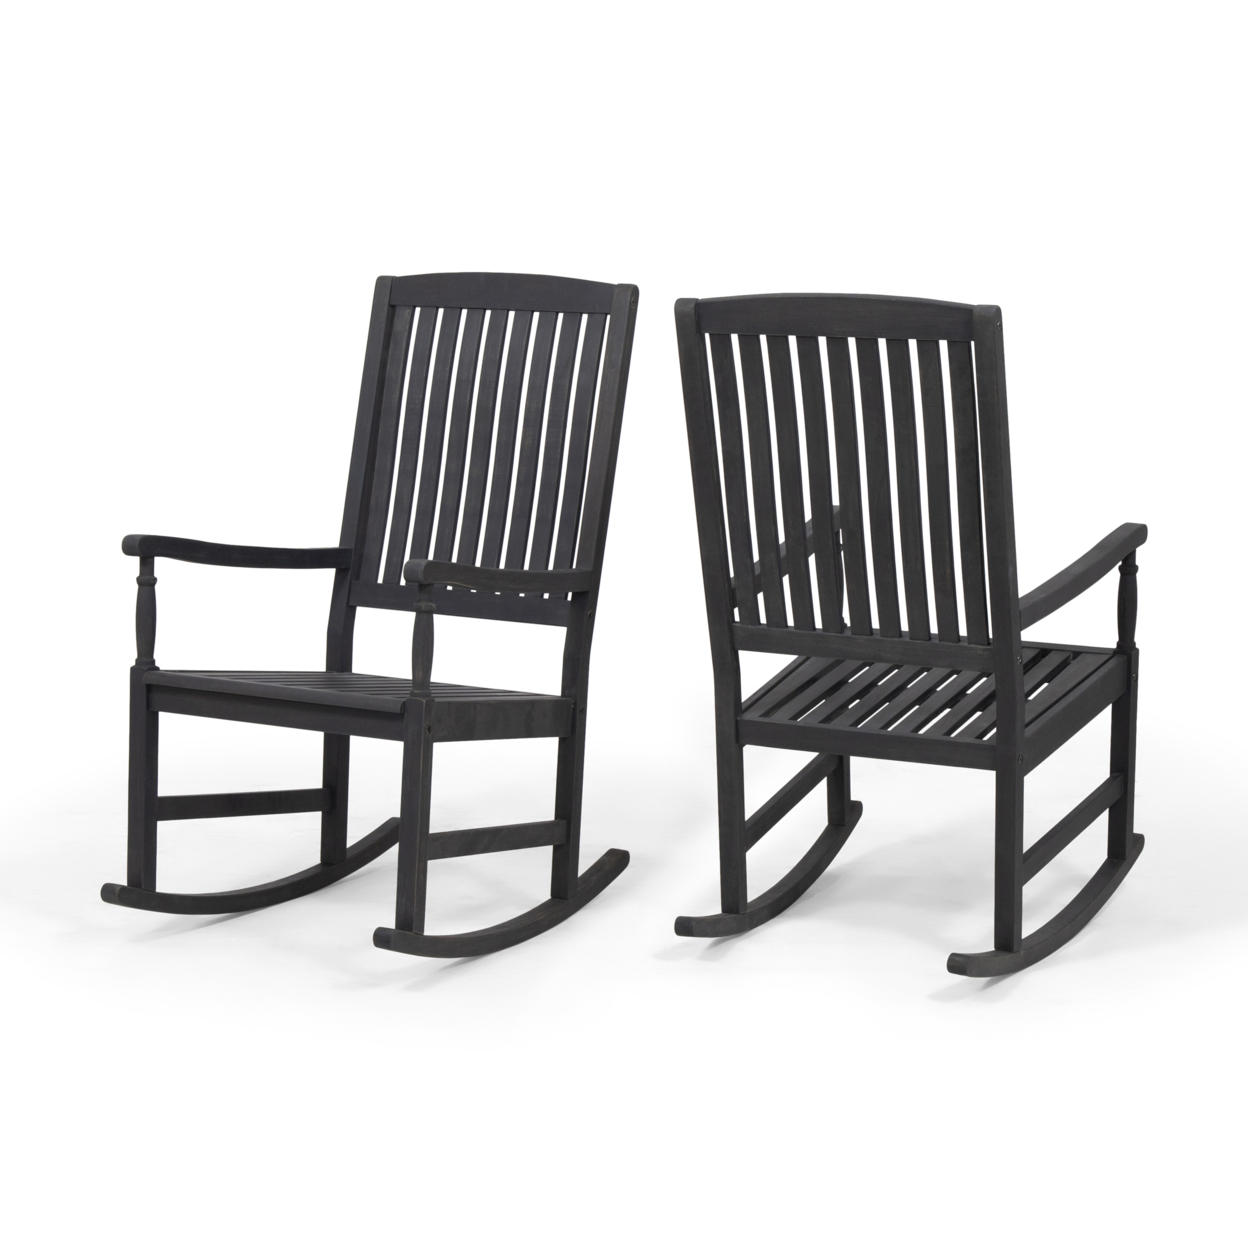 Penny Outdoor Acacia Wood Rocking Chairs (Set Of 2) - Teak Finish